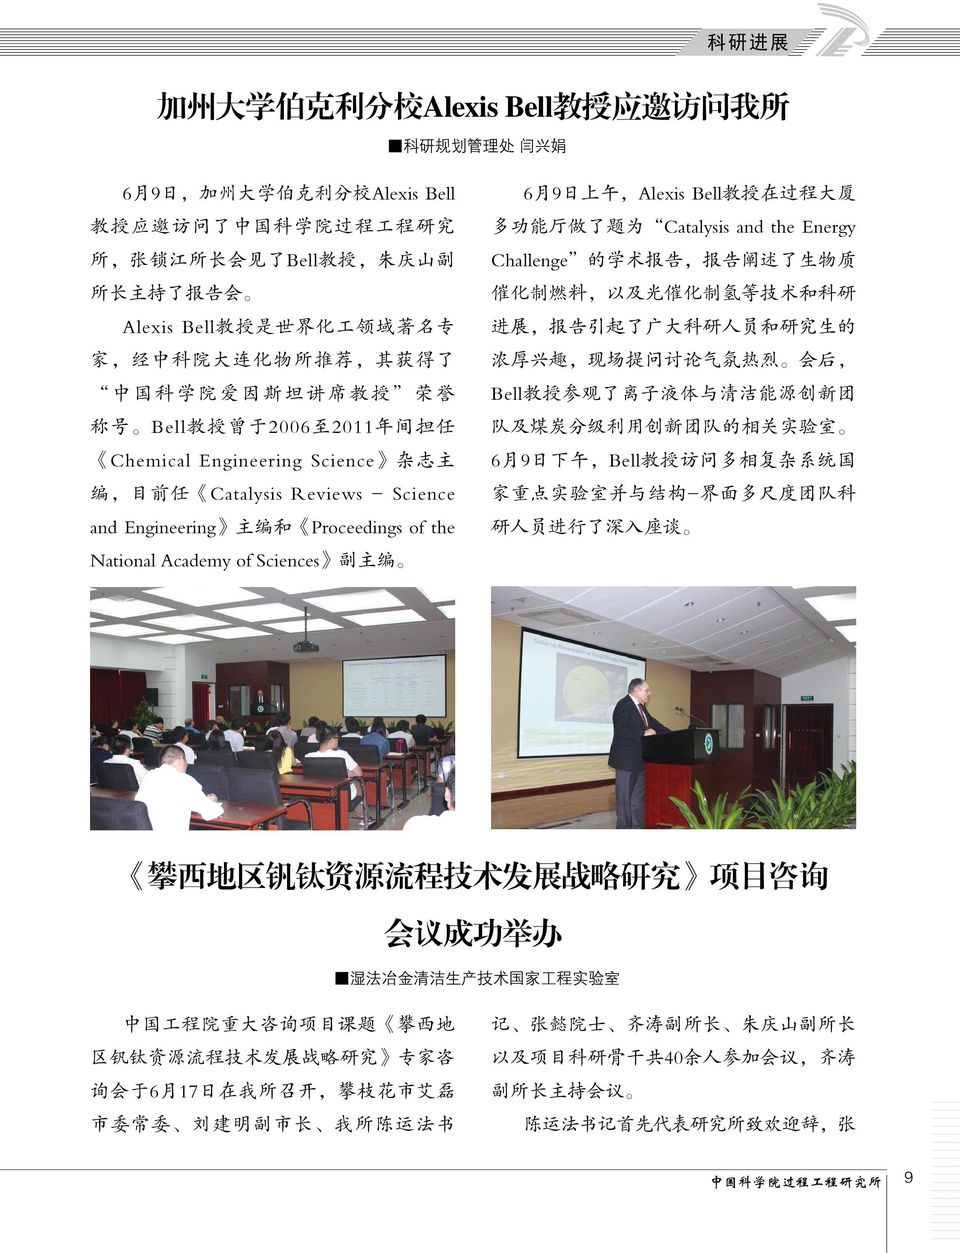 Reviews - Science and Engineering 主 编 和 Proceedings of the National Academy of Sciences 副 主 编 6 月 9 日 上 午,Alexis Bell 教 授 在 过 程 大 厦 多 功 能 厅 做 了 题 为 Catalysis and the Energy Challenge 的 学 术 报 告, 报 告 阐